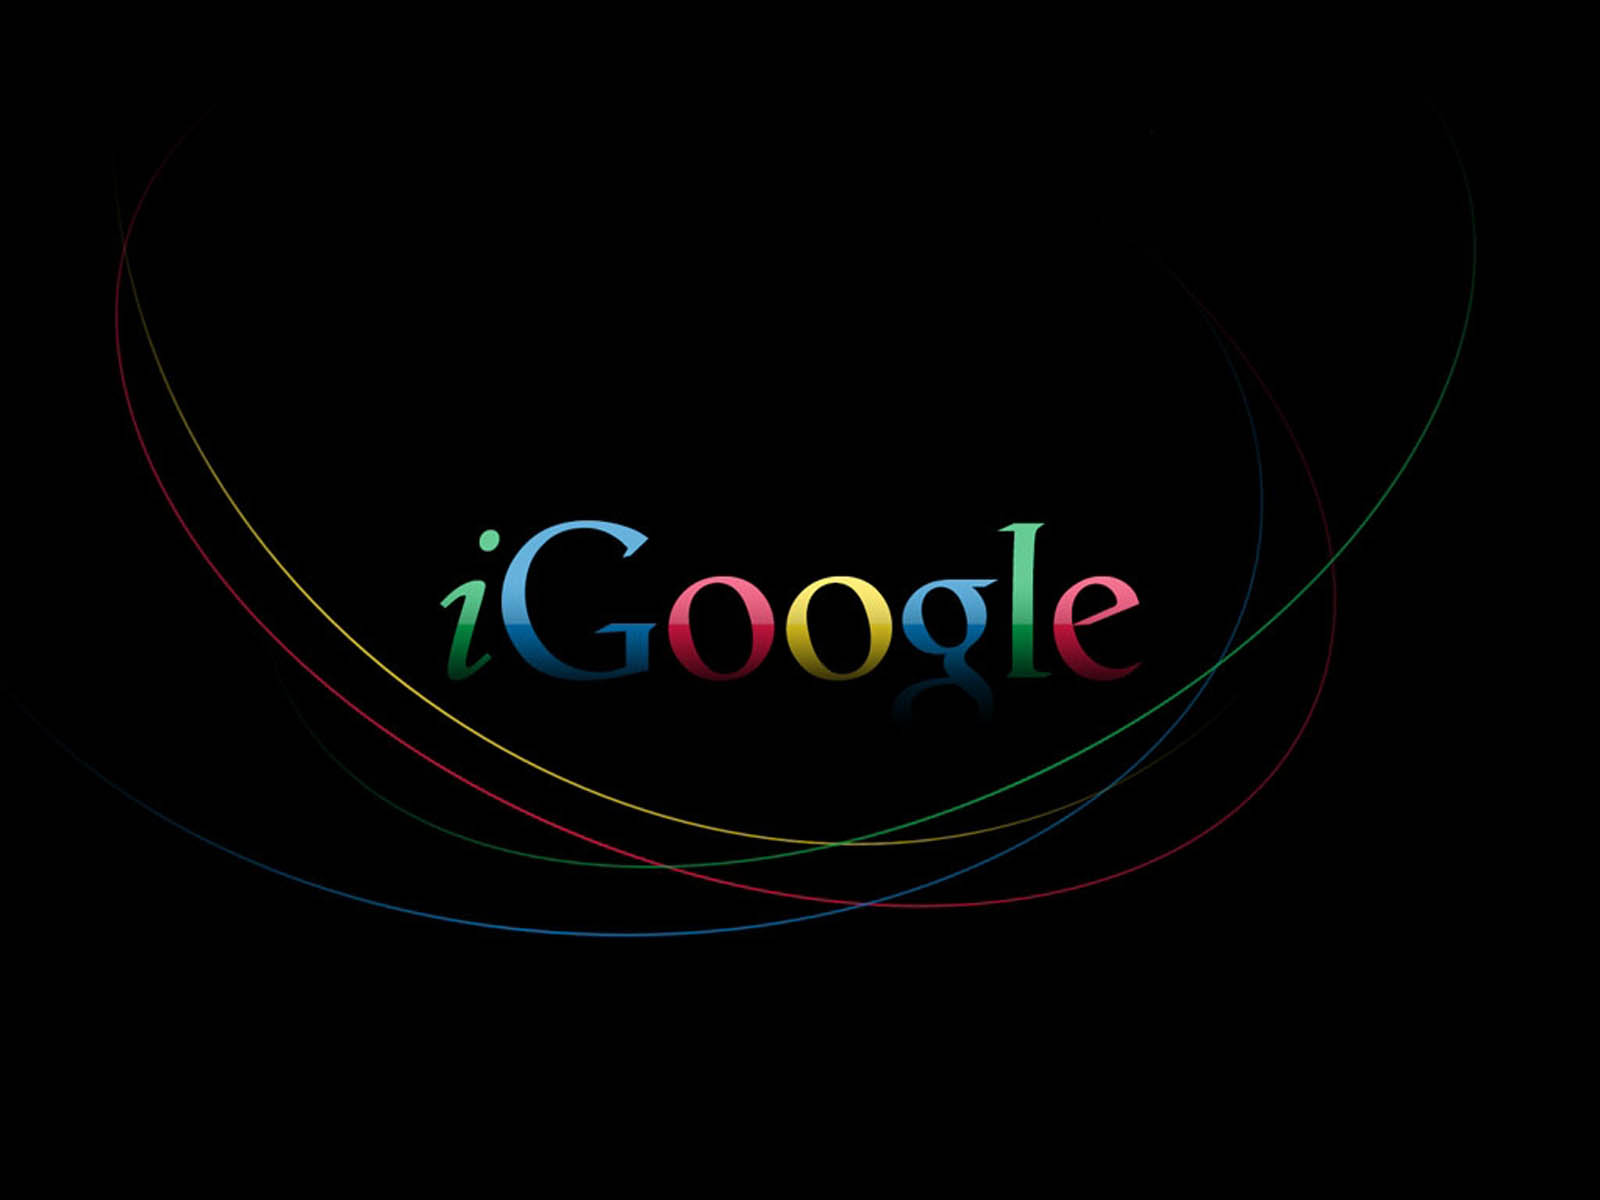 Google Wallpaper Background Paos Pictures And Image For